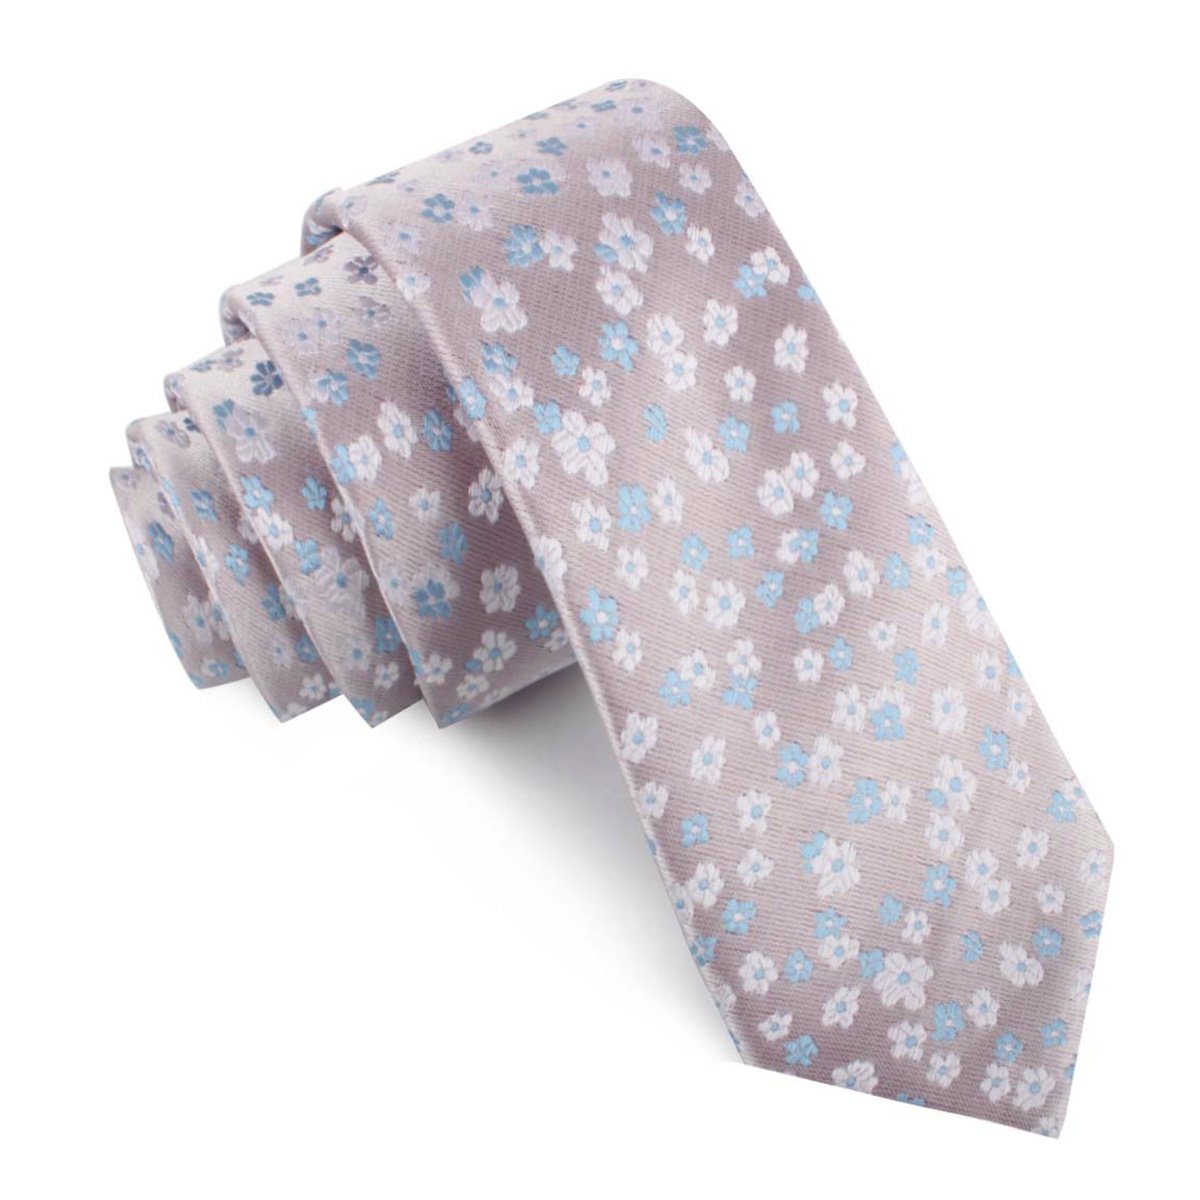 Miharashi Seaside Blue and White Floral Skinny Tie